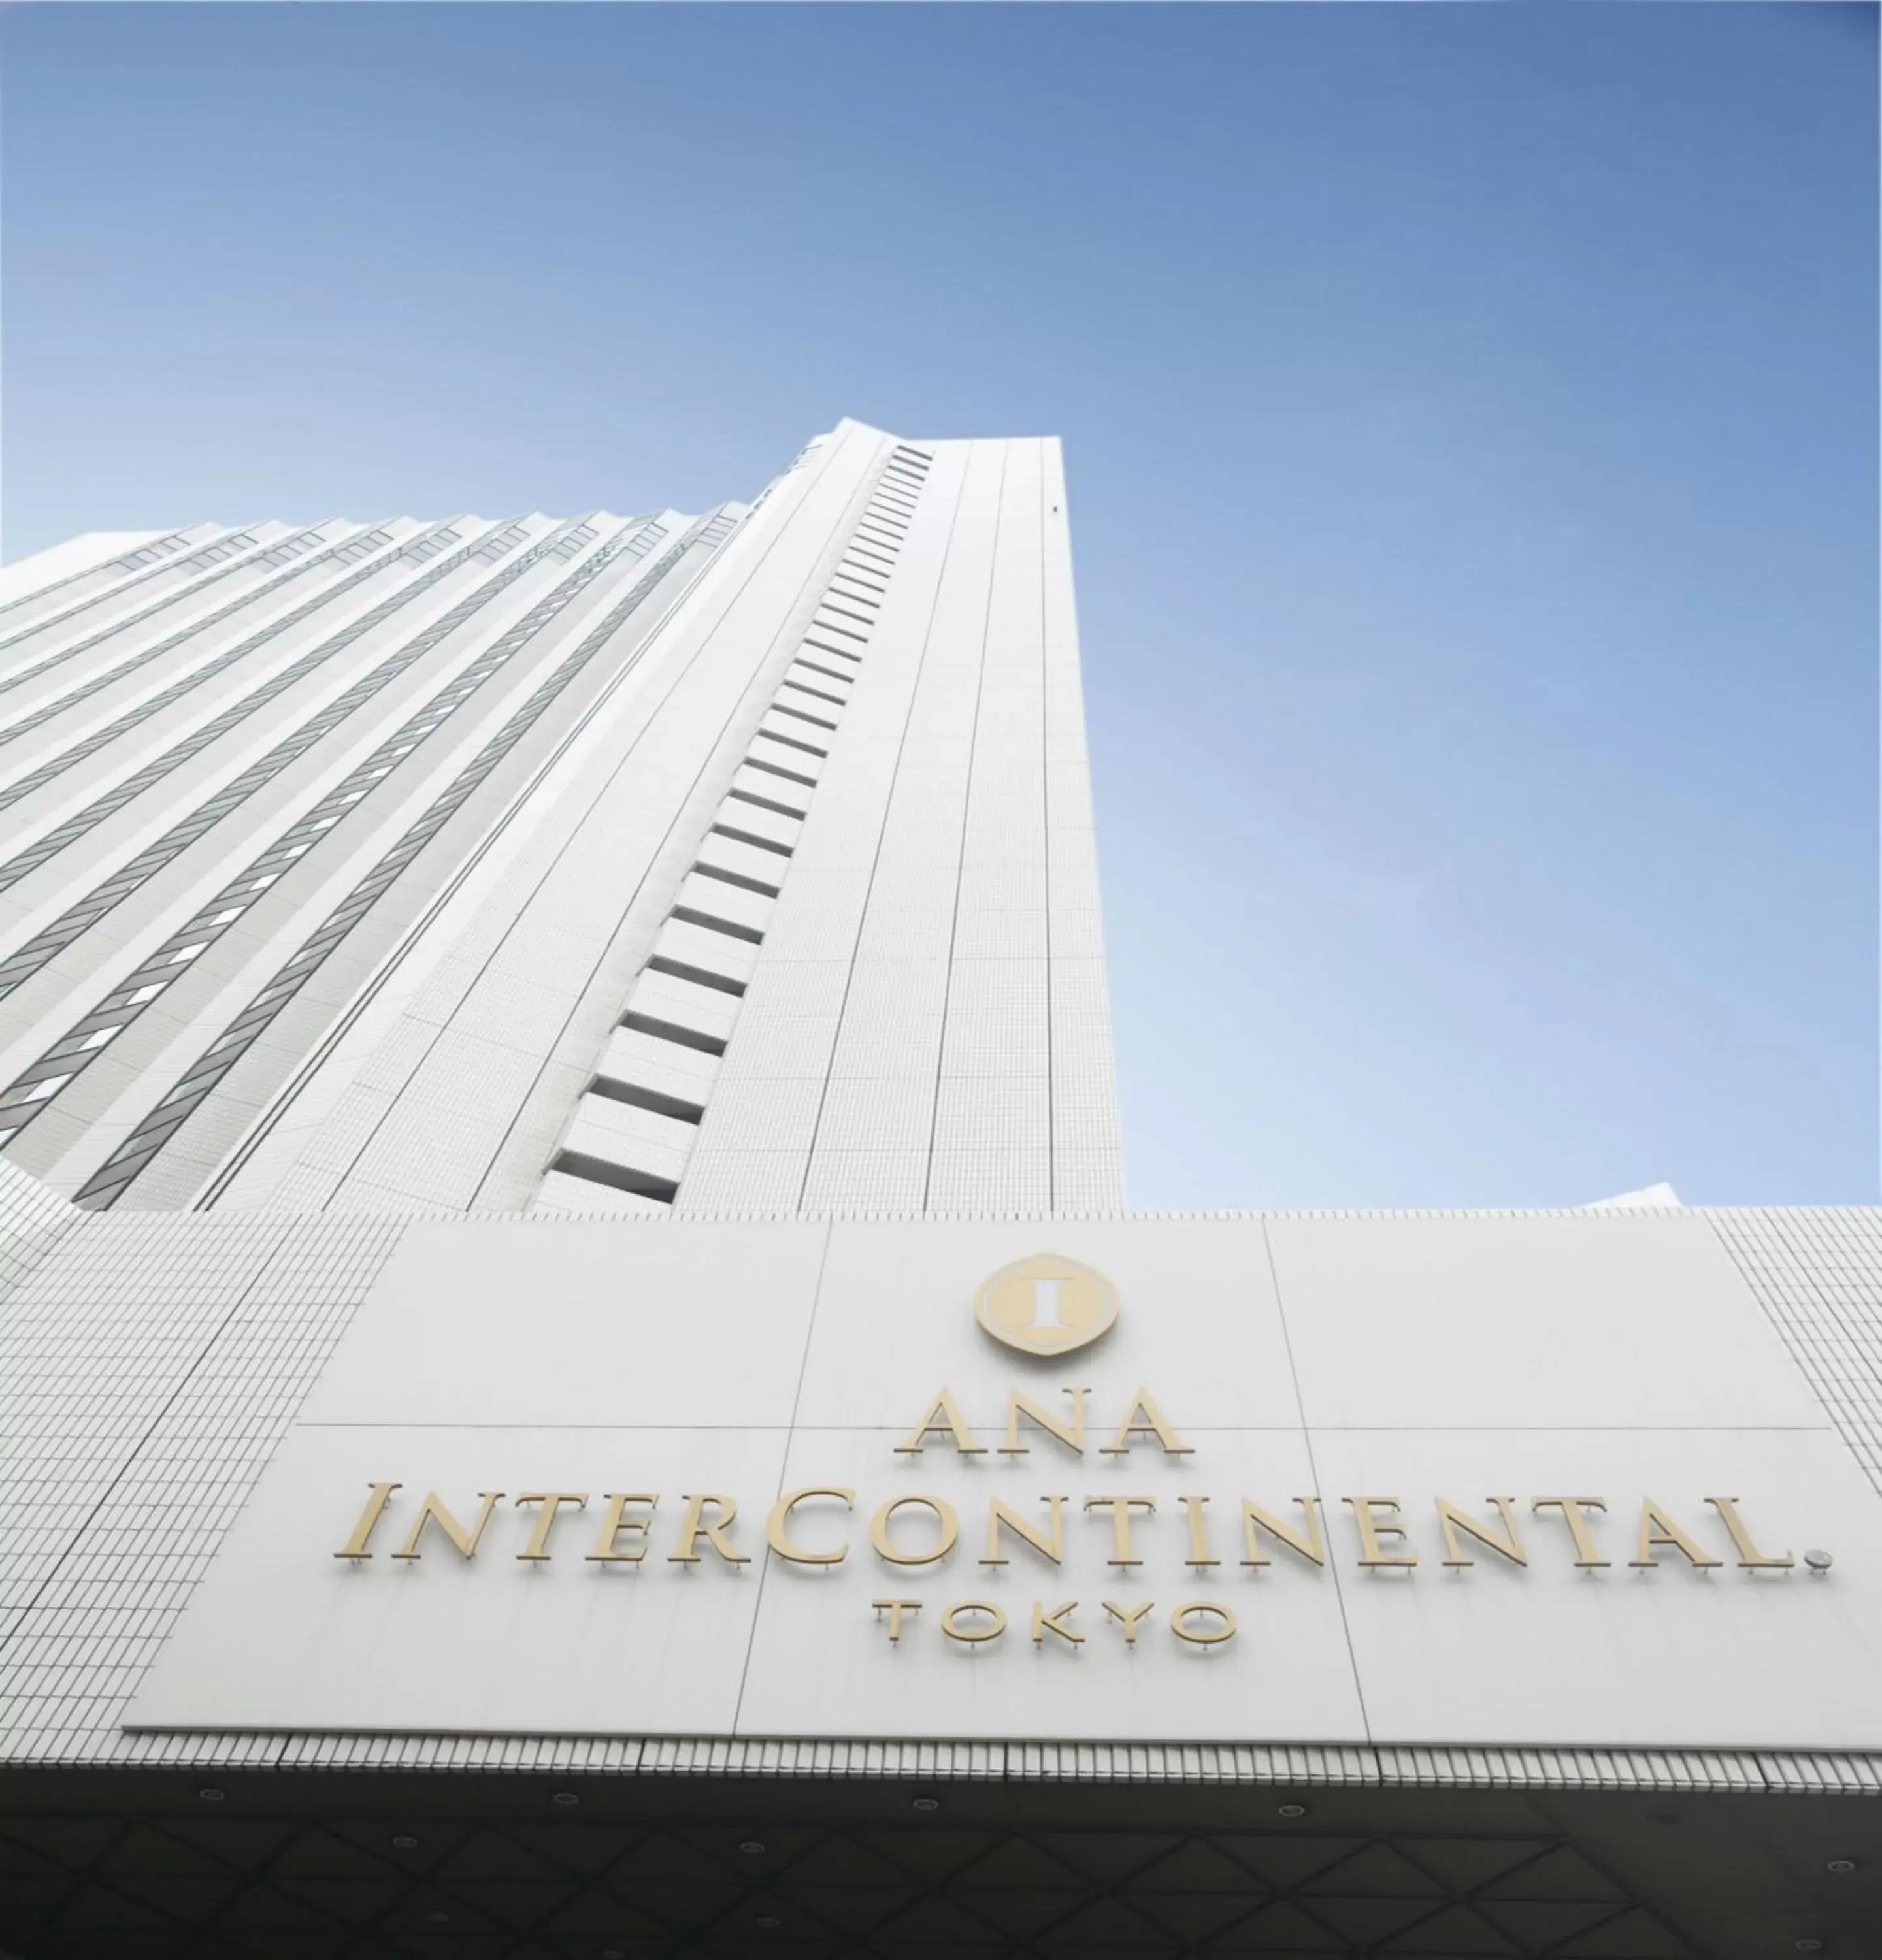 Property Building in ANA InterContinental Tokyo, an IHG Hotel